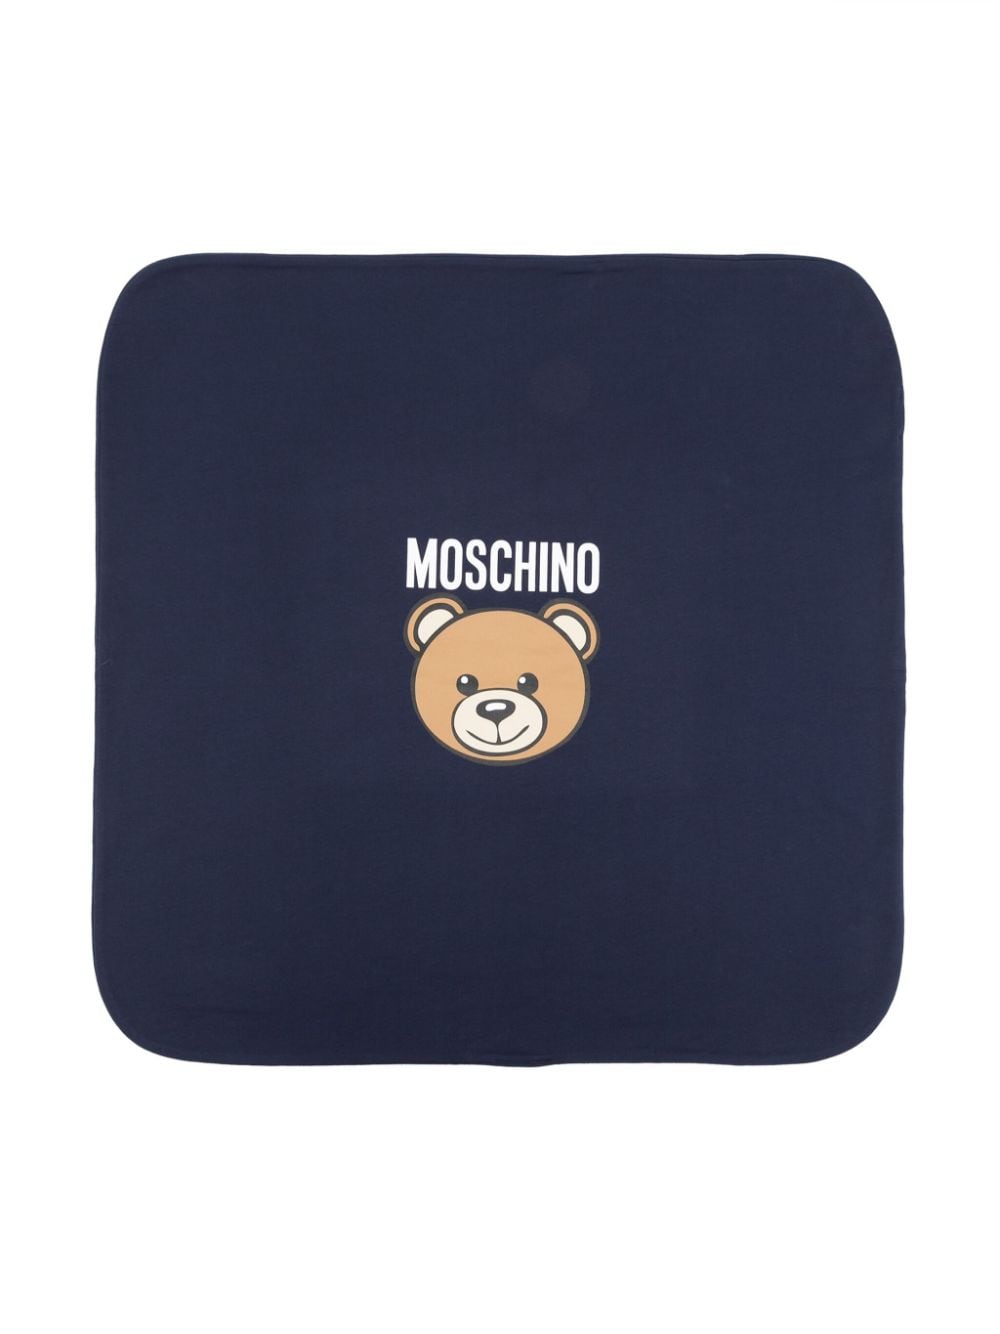 Navy blue baby blanket with logo